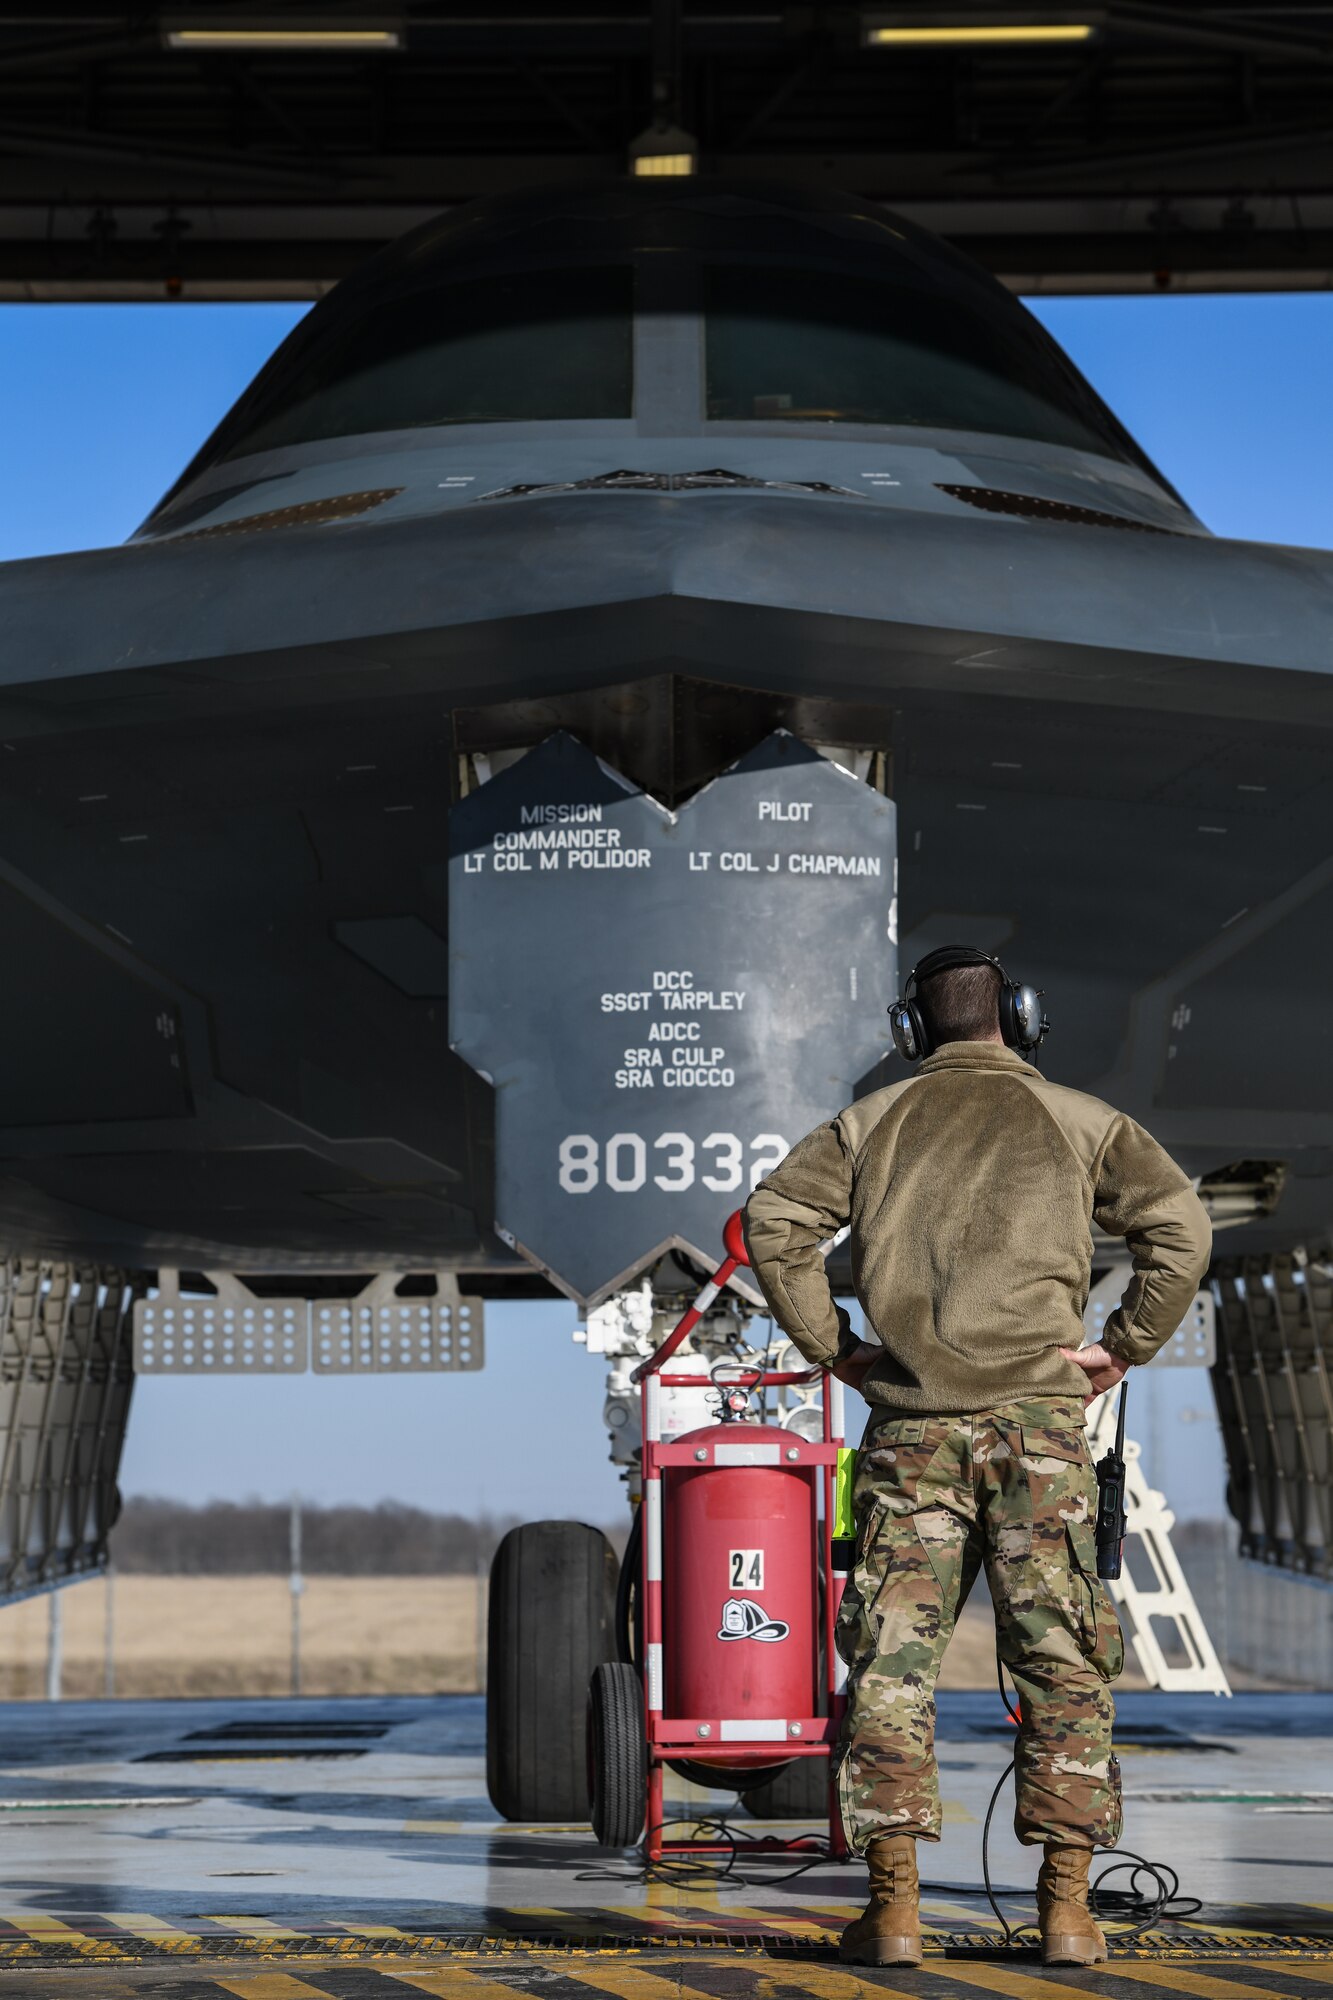 U.S. Air National Guard Tech. Sgt. Justin Aeckerle, a B-2 crew chief assigned to the 131st Maintenance Squadron, readies a B-2 Spirit for flight at Whiteman Air Force Base, Missouri, March 8, 2020. The B-2 crew took off from Whiteman AFB to support U.S. Strategic Command Bomber Task Force operations in Europe. The 131st Bomb Wing’s 131st MXS is a total-force partner unit to the 509th Bomb Wing. (U.S. Air Force photo by Tech. Sgt. Alexander W. Riedel)